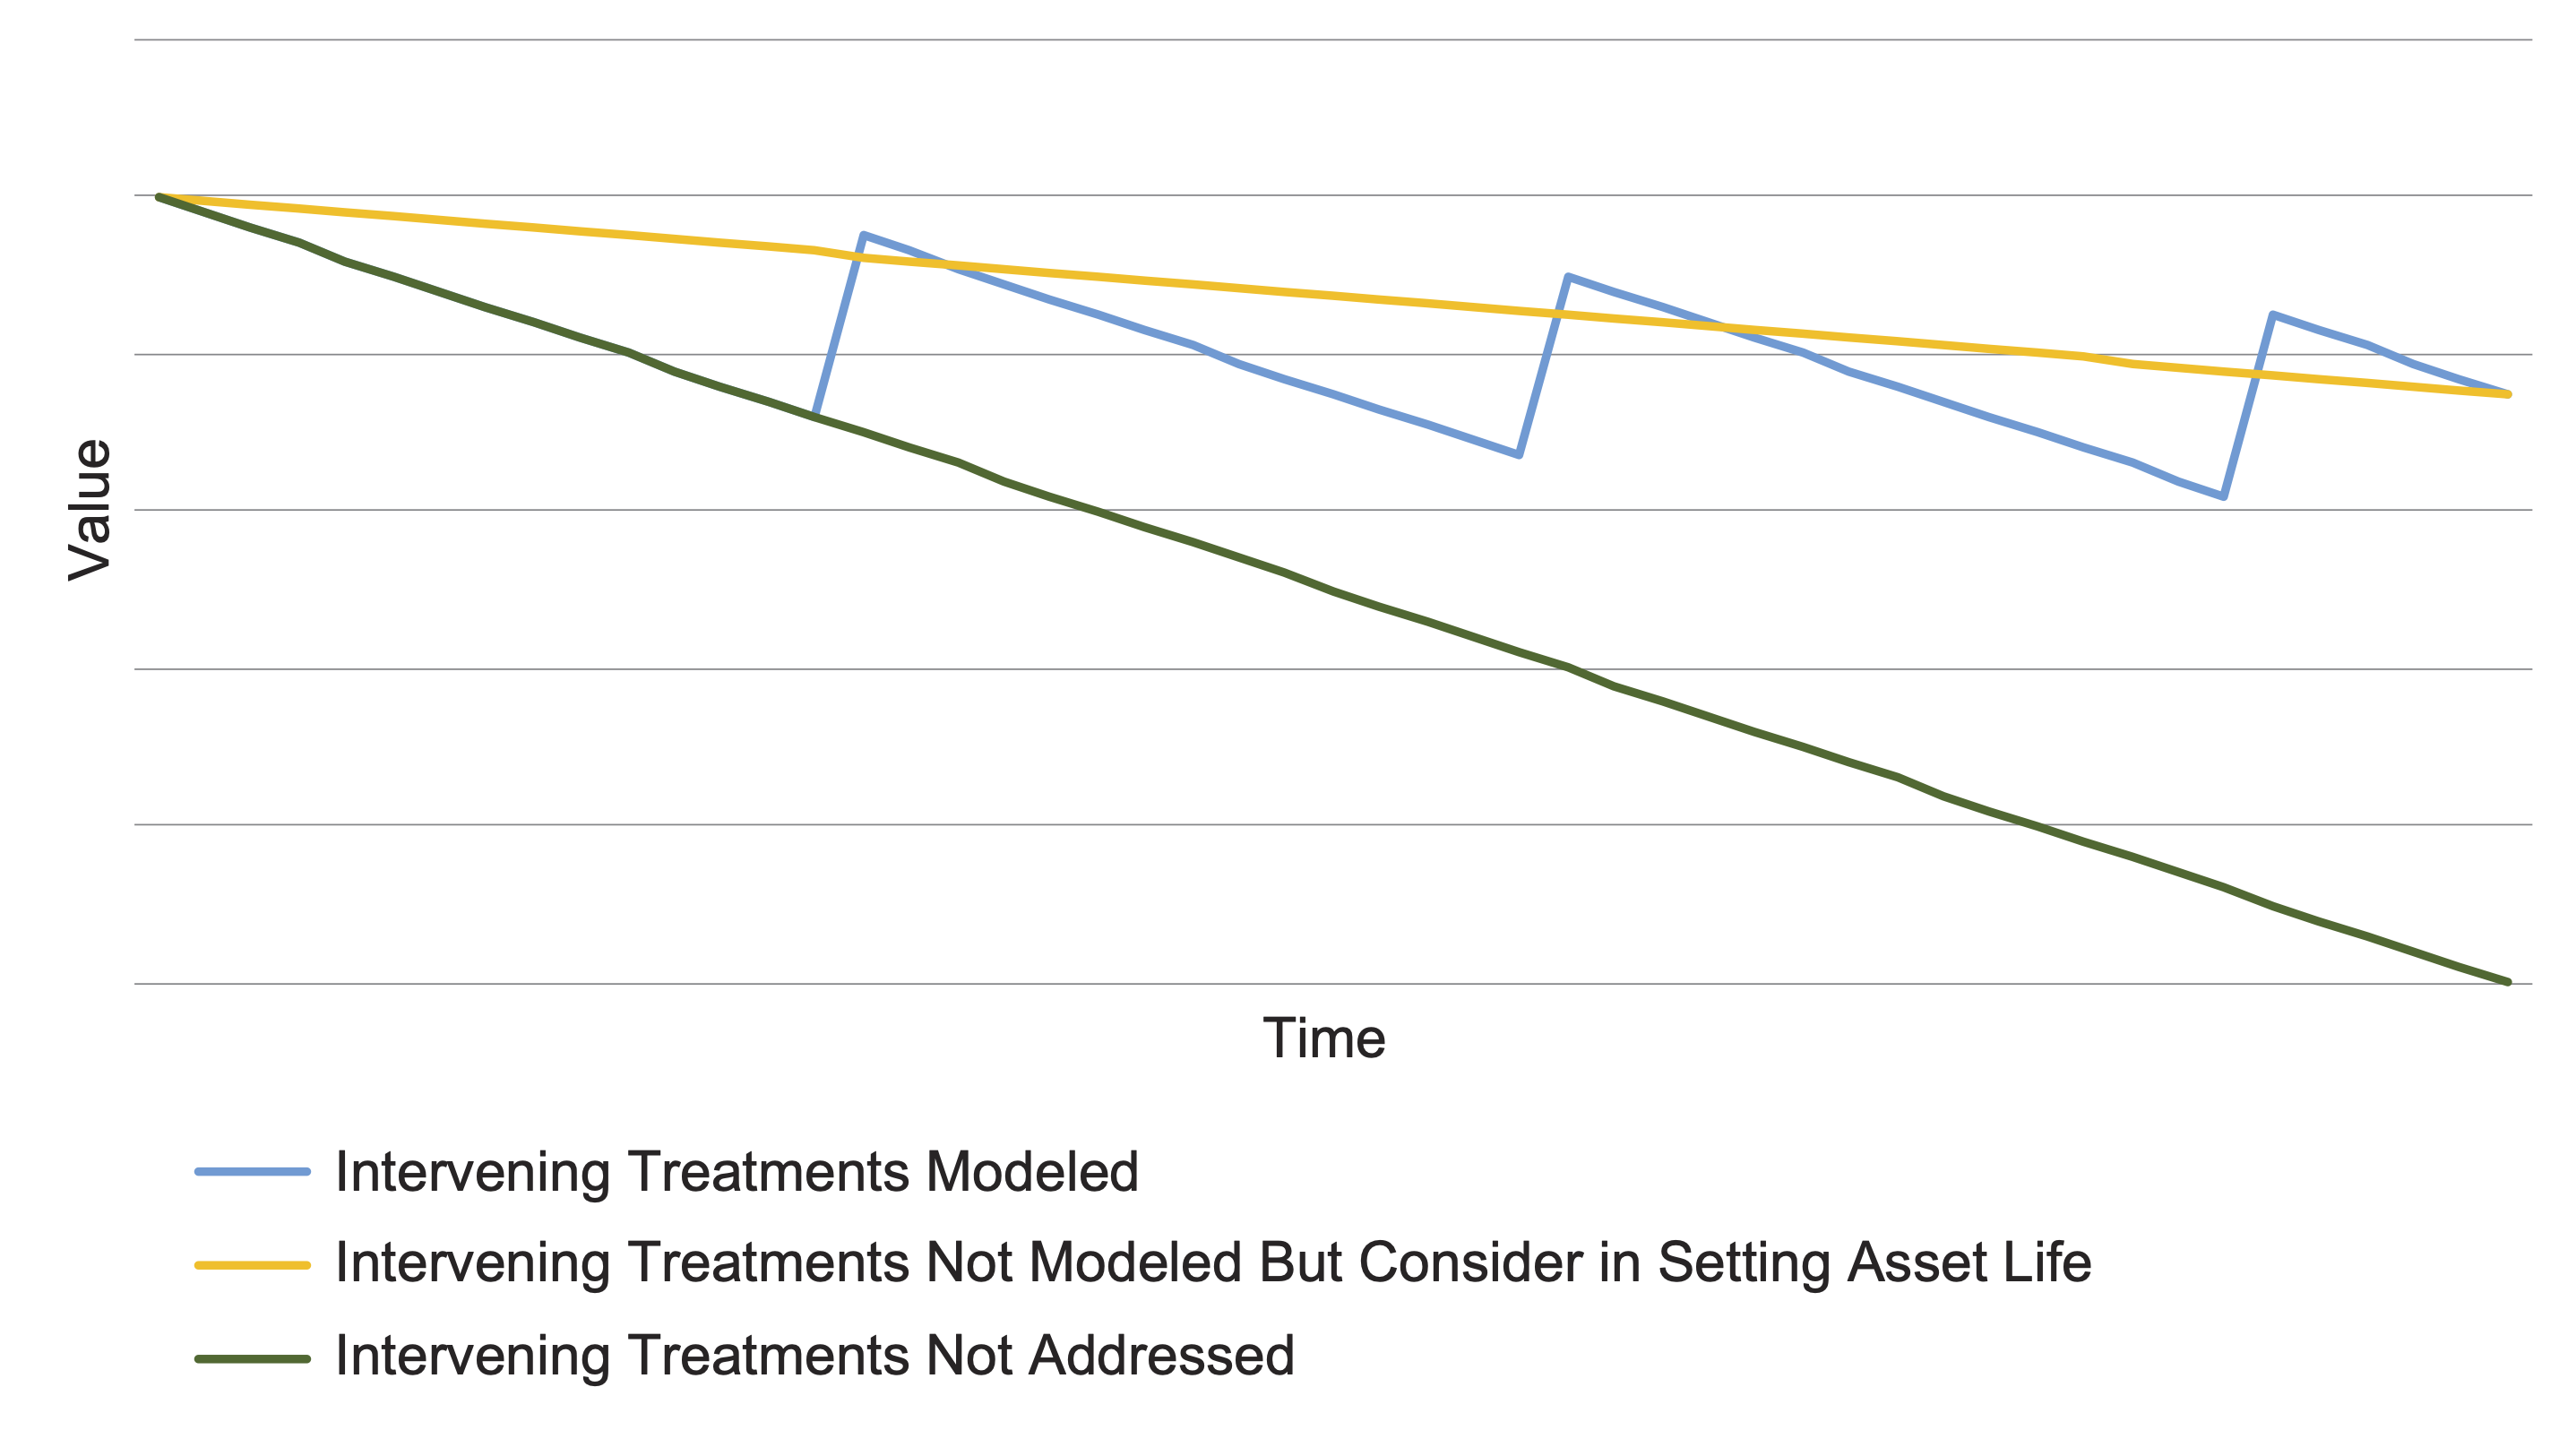 Line graph showing the impact of treatments modelled, treatments not modelled but still considered, and treatments not addressed. Treatments not addressed decrease in value more quickly when compared to the other two lines.